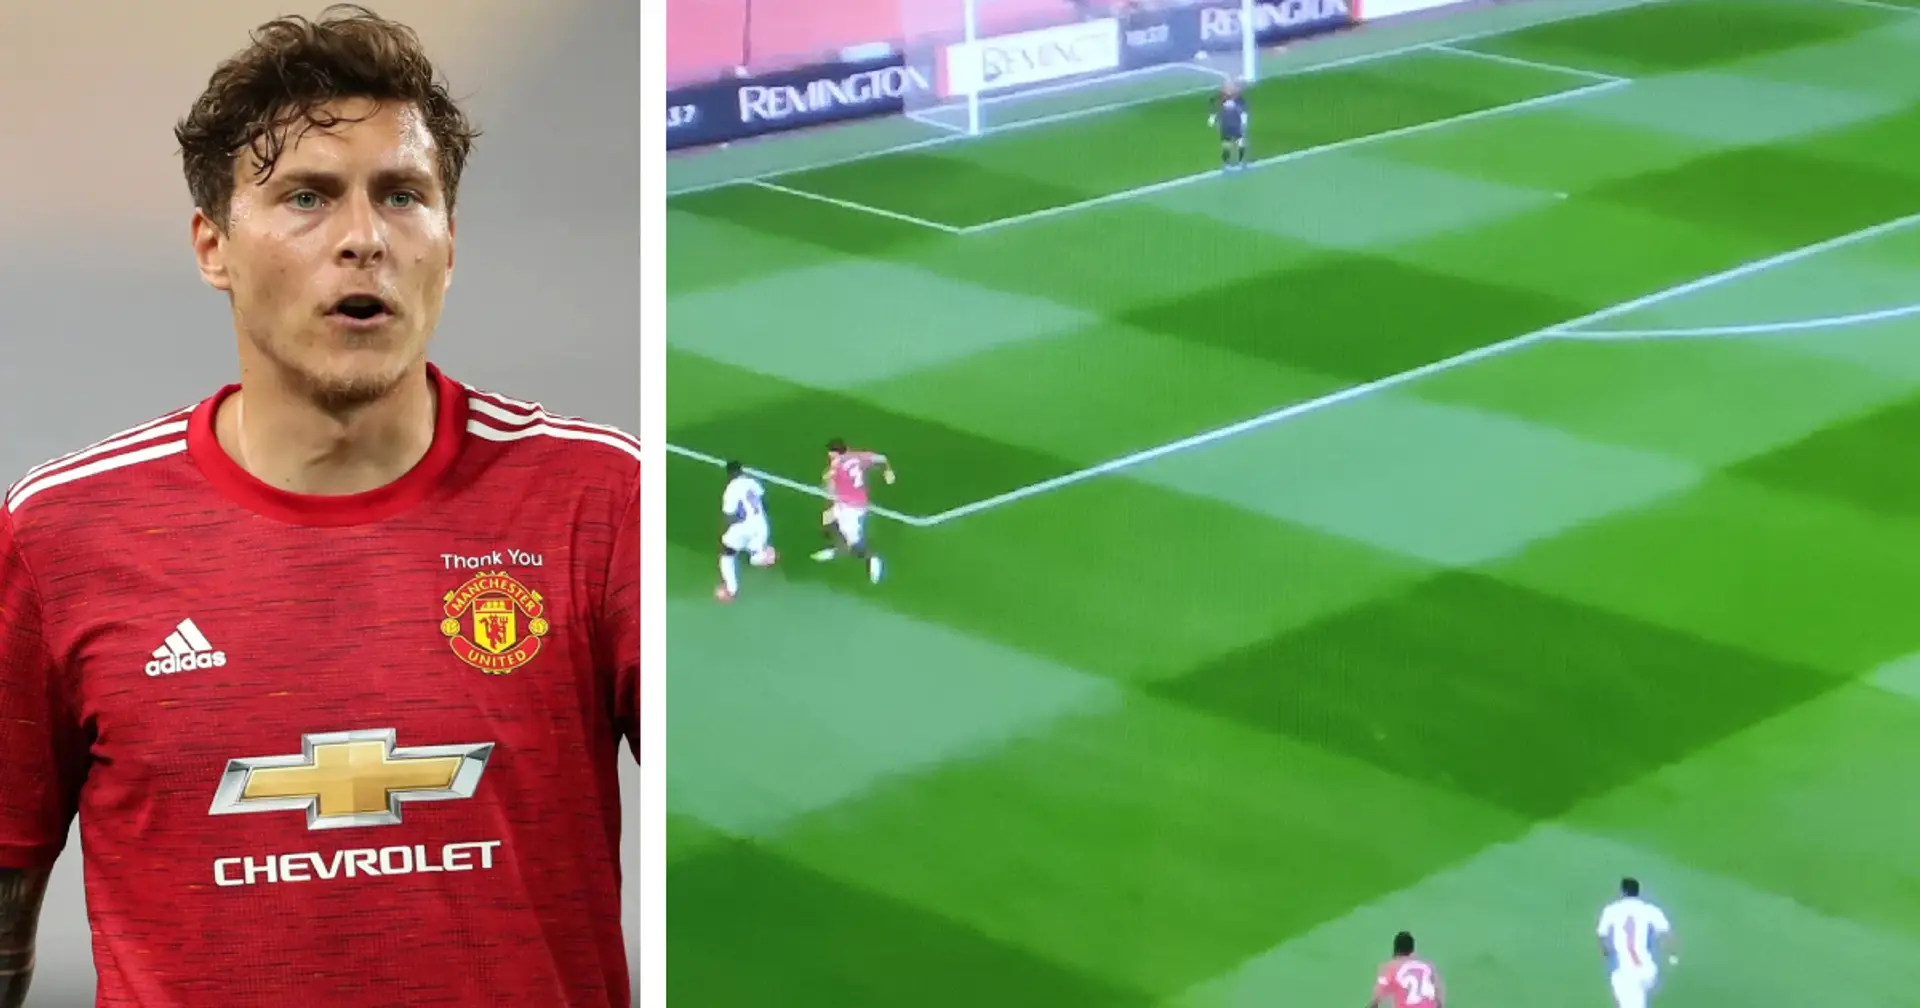 2 key moments that show Lindelof is not the only one at fault for Palace's opening goal